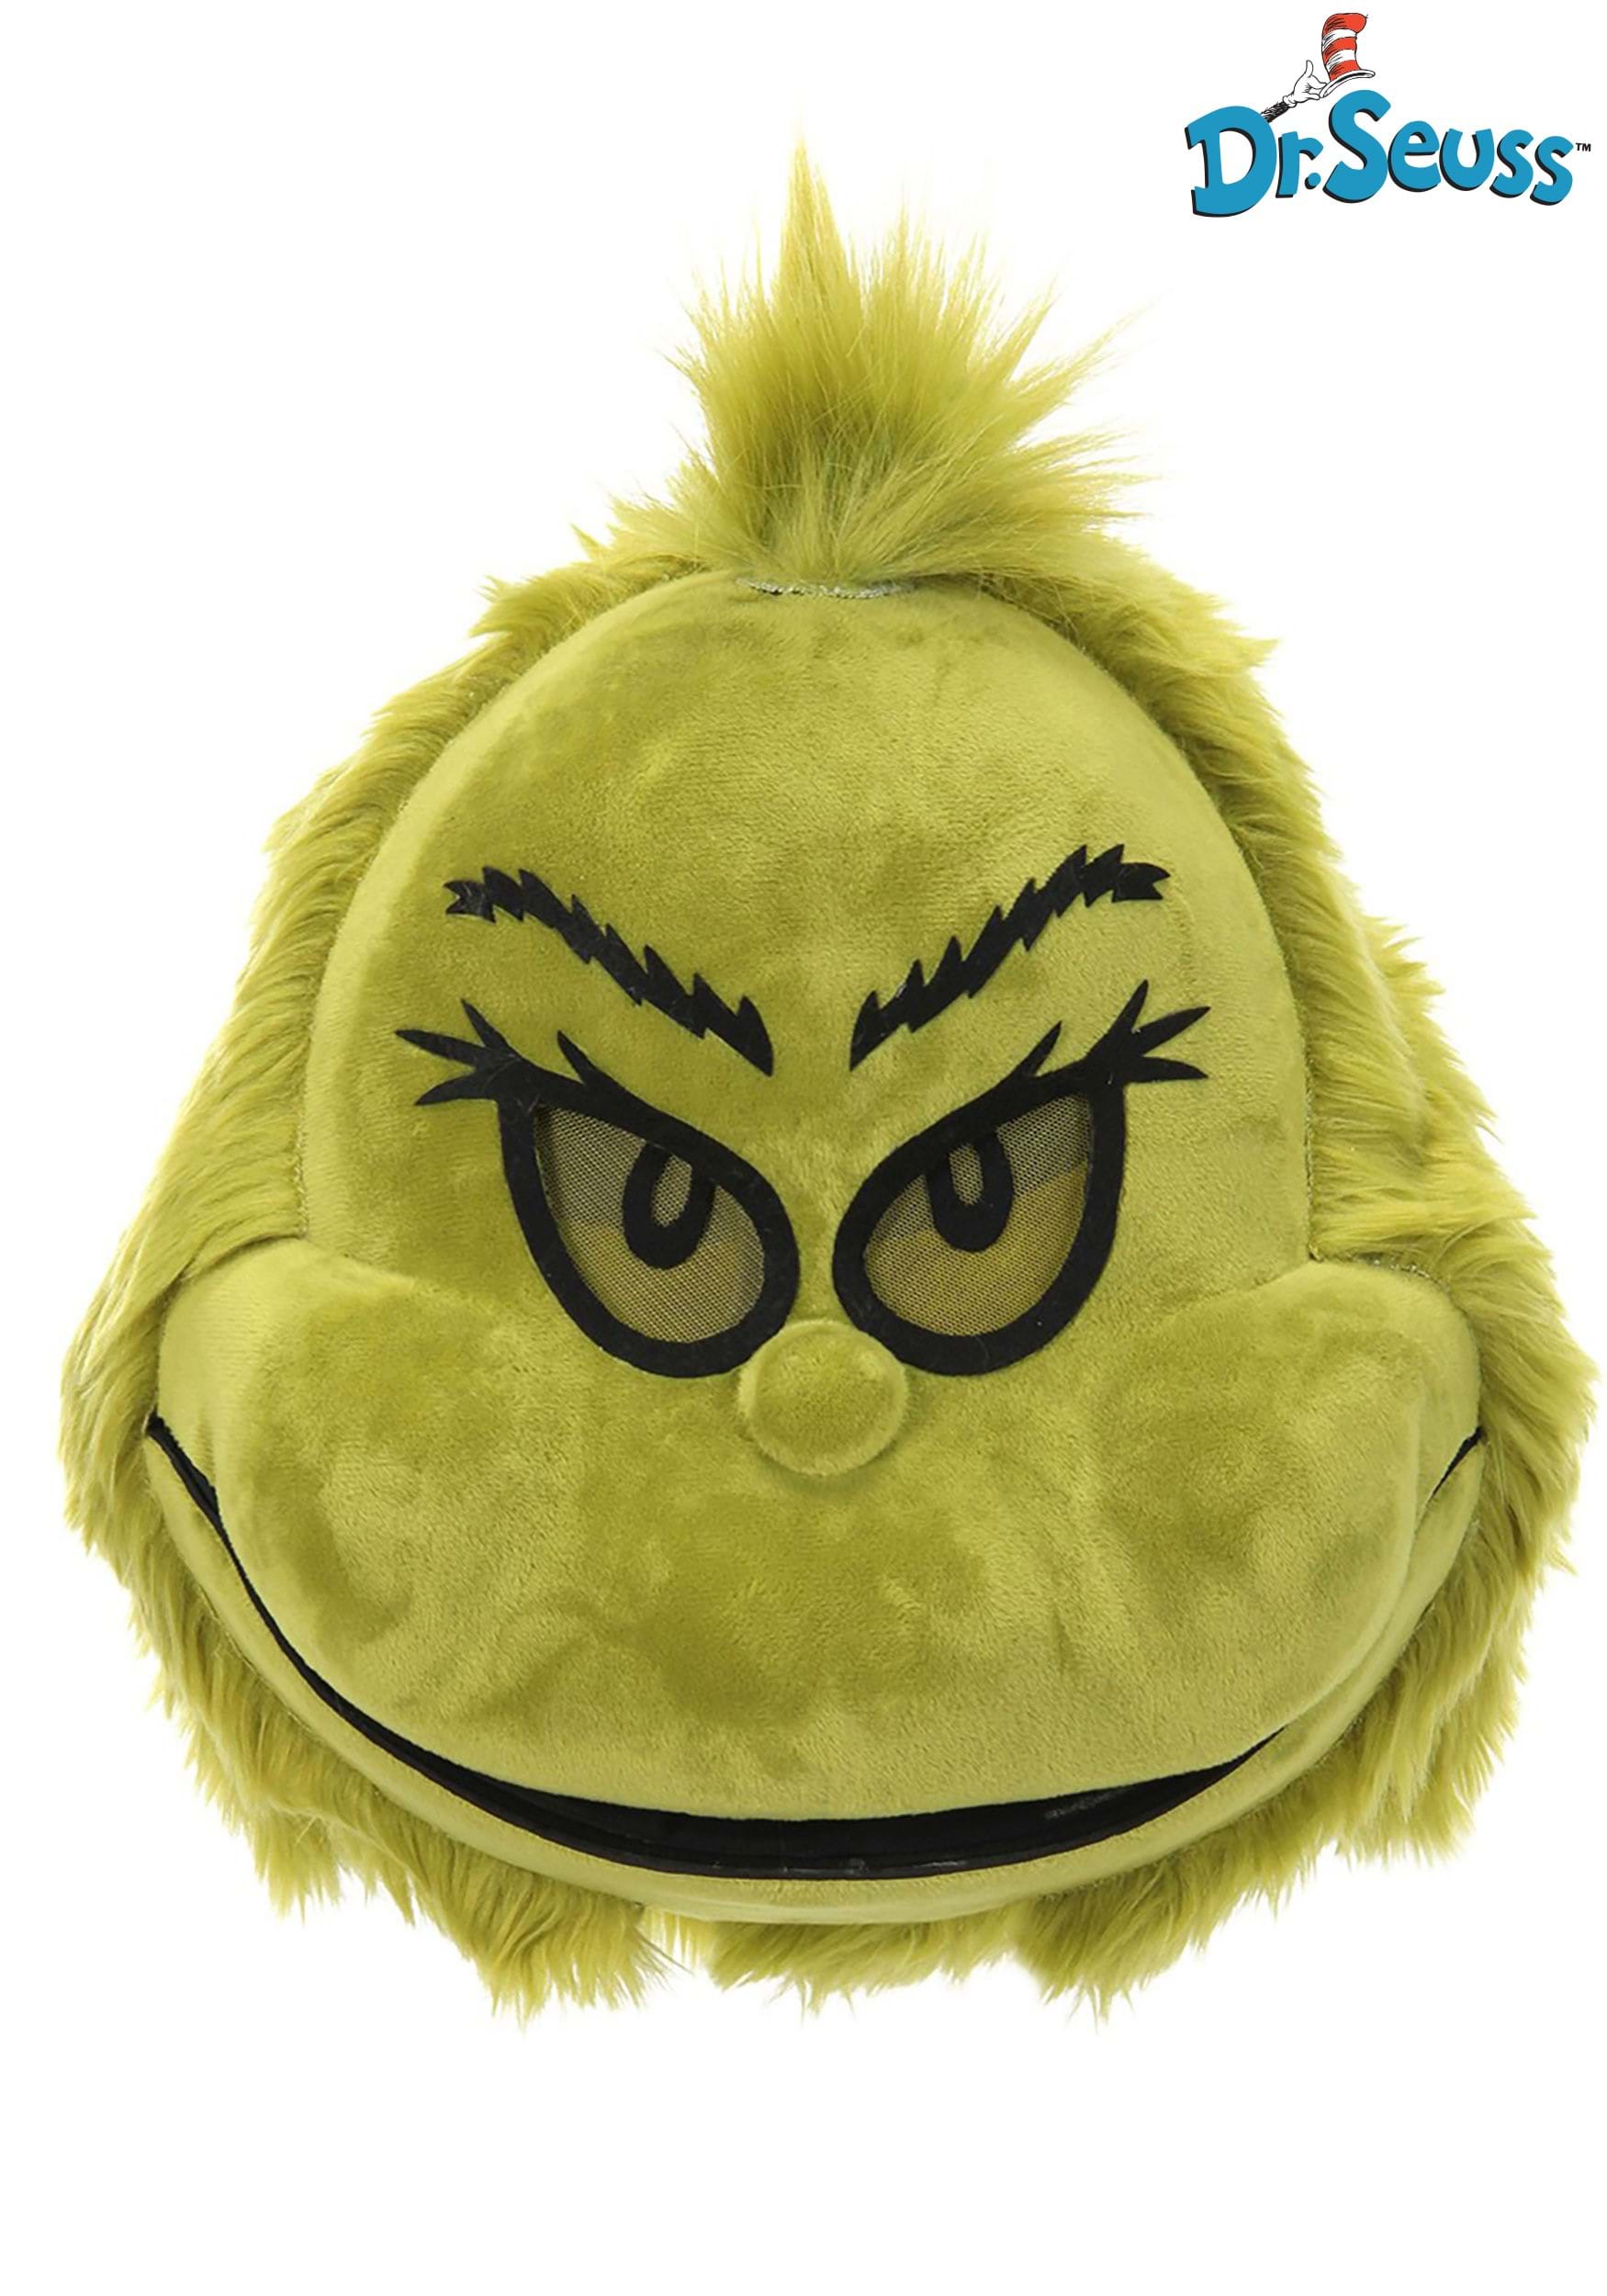 https://images.halloween.com/products/58960/1-1/the-grinch-plush-mouth-mover-mask.jpg